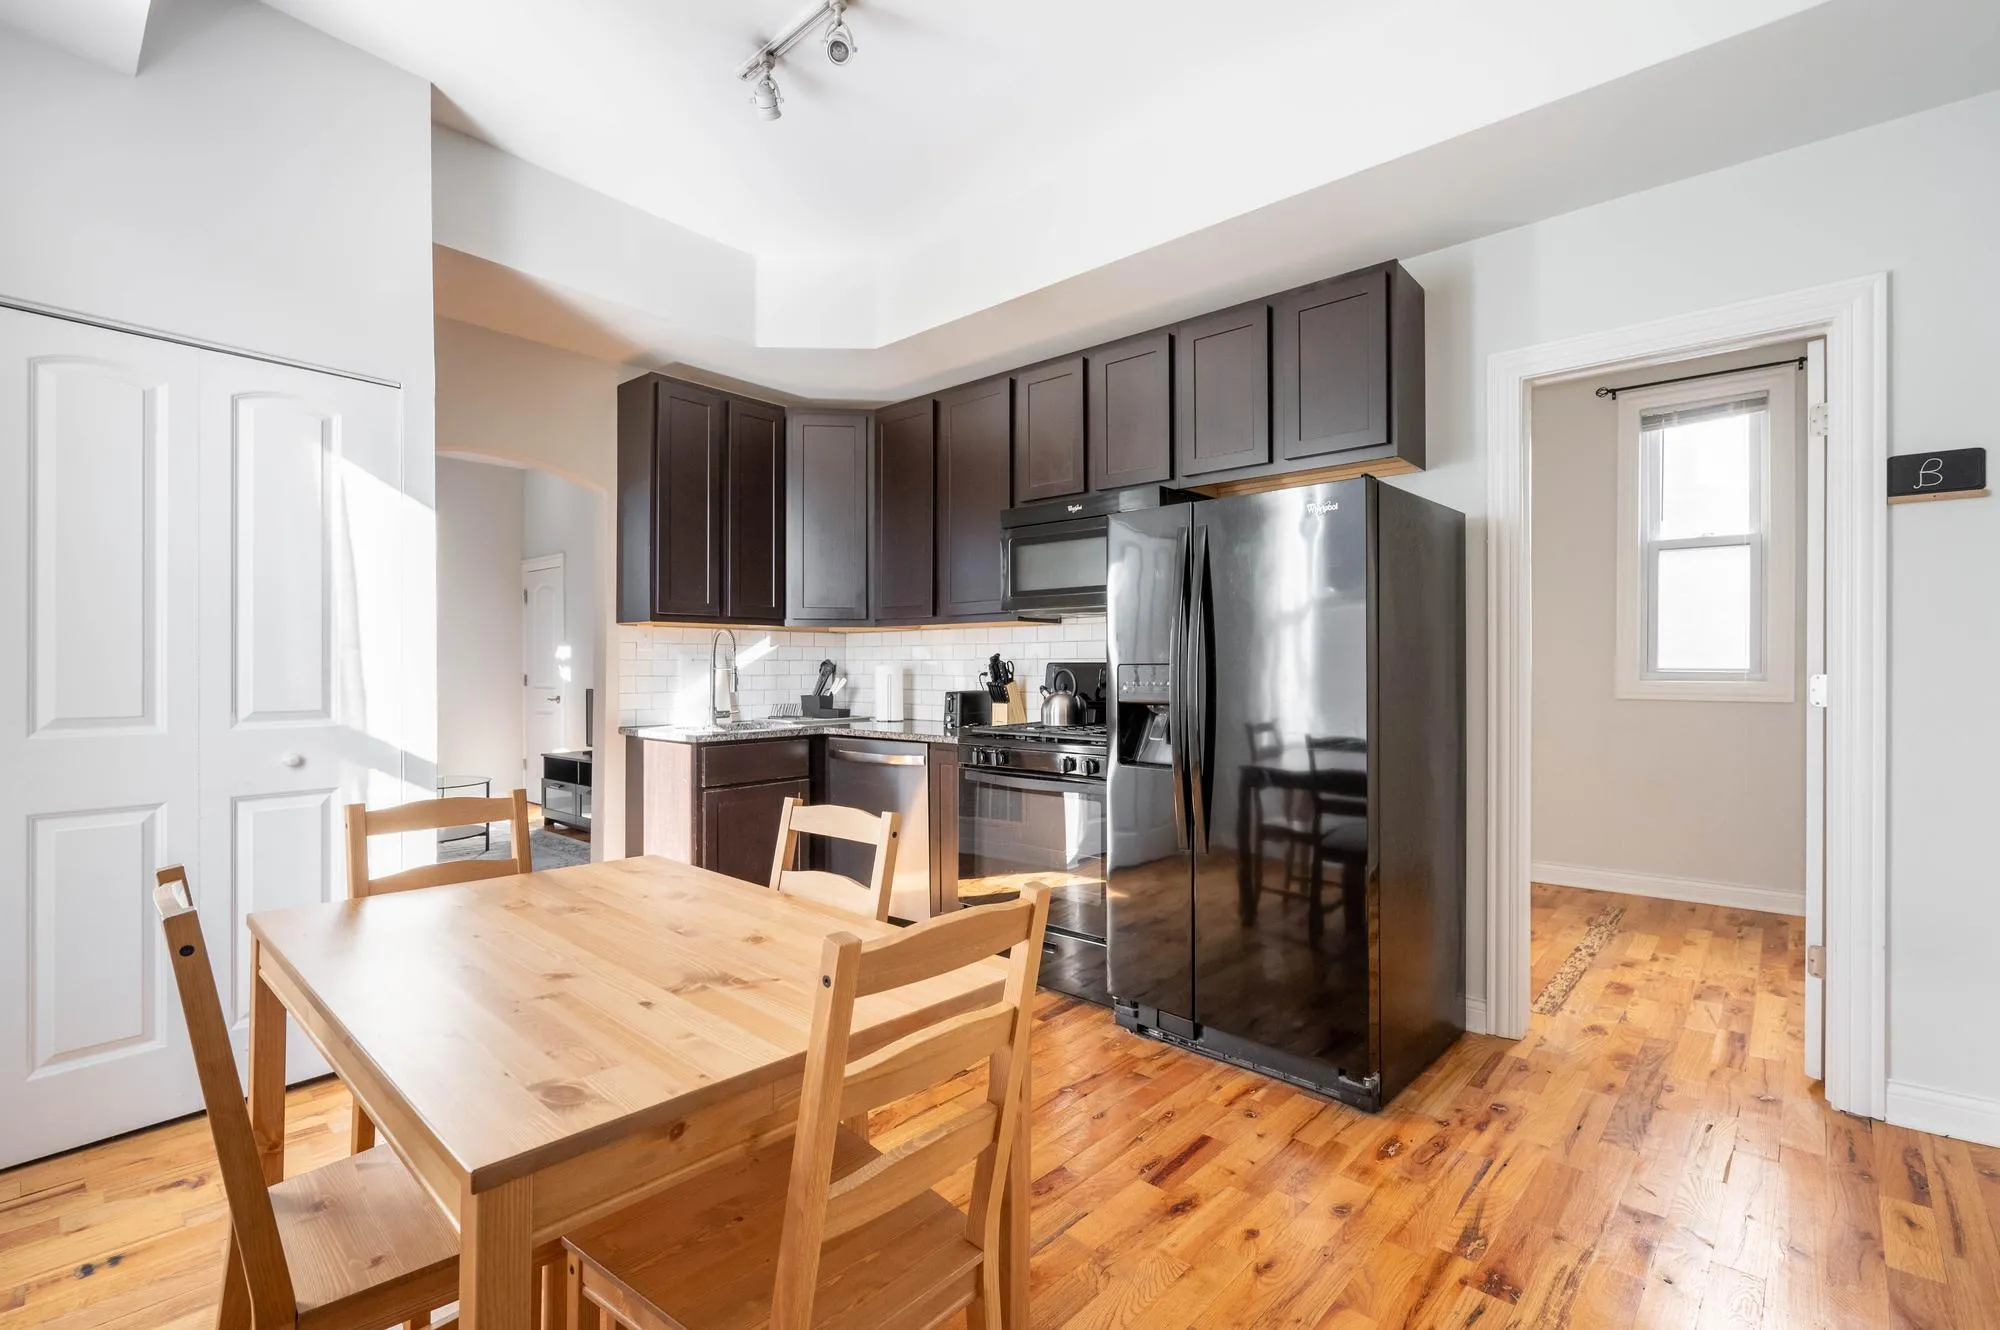 1443 N CAMPBELL AVE 60622-unit#2r-Chicago-IL